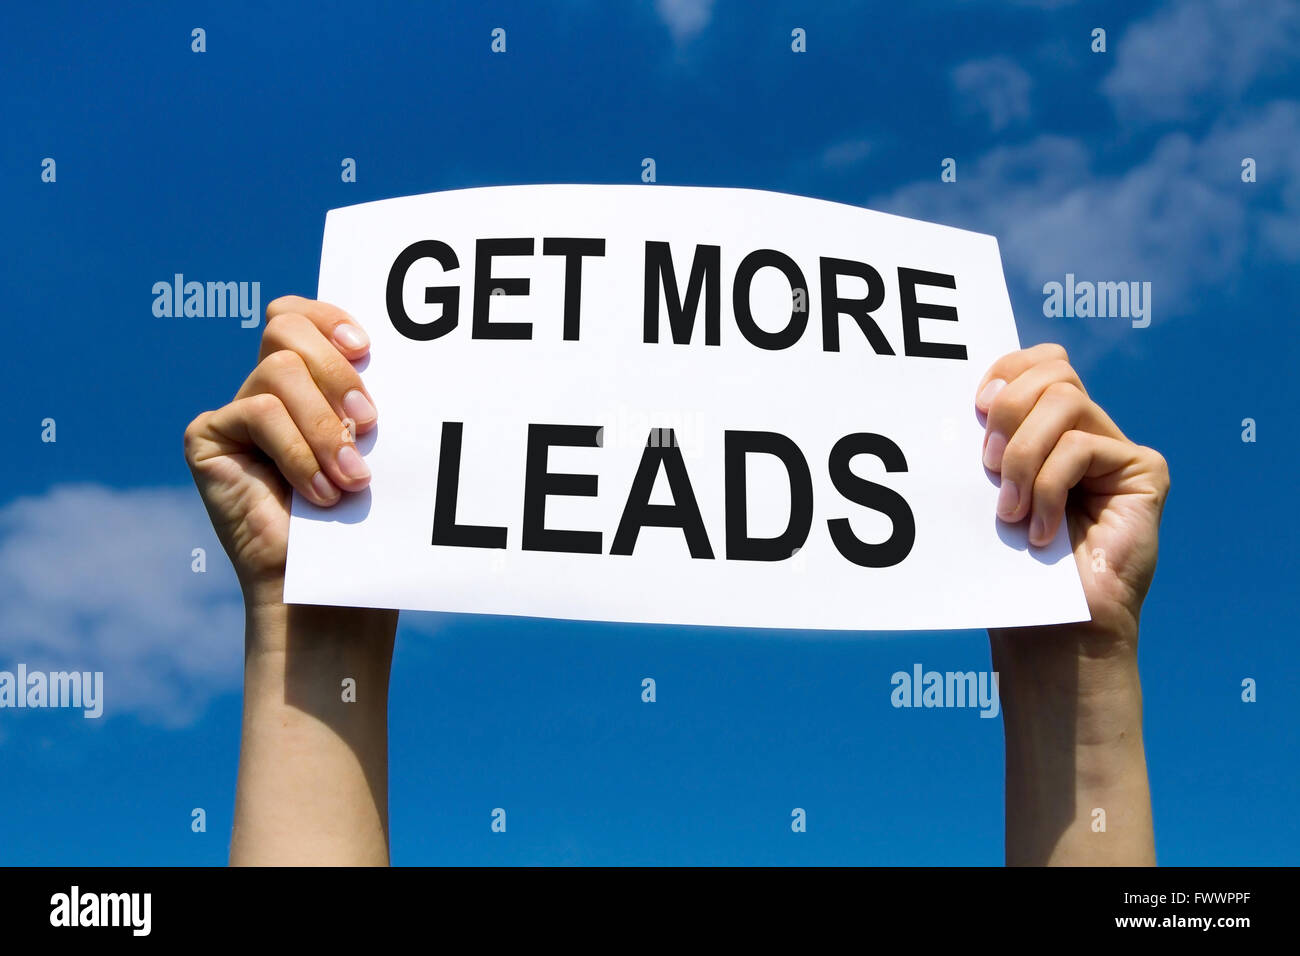 get more leads, concept text on the paper Stock Photo